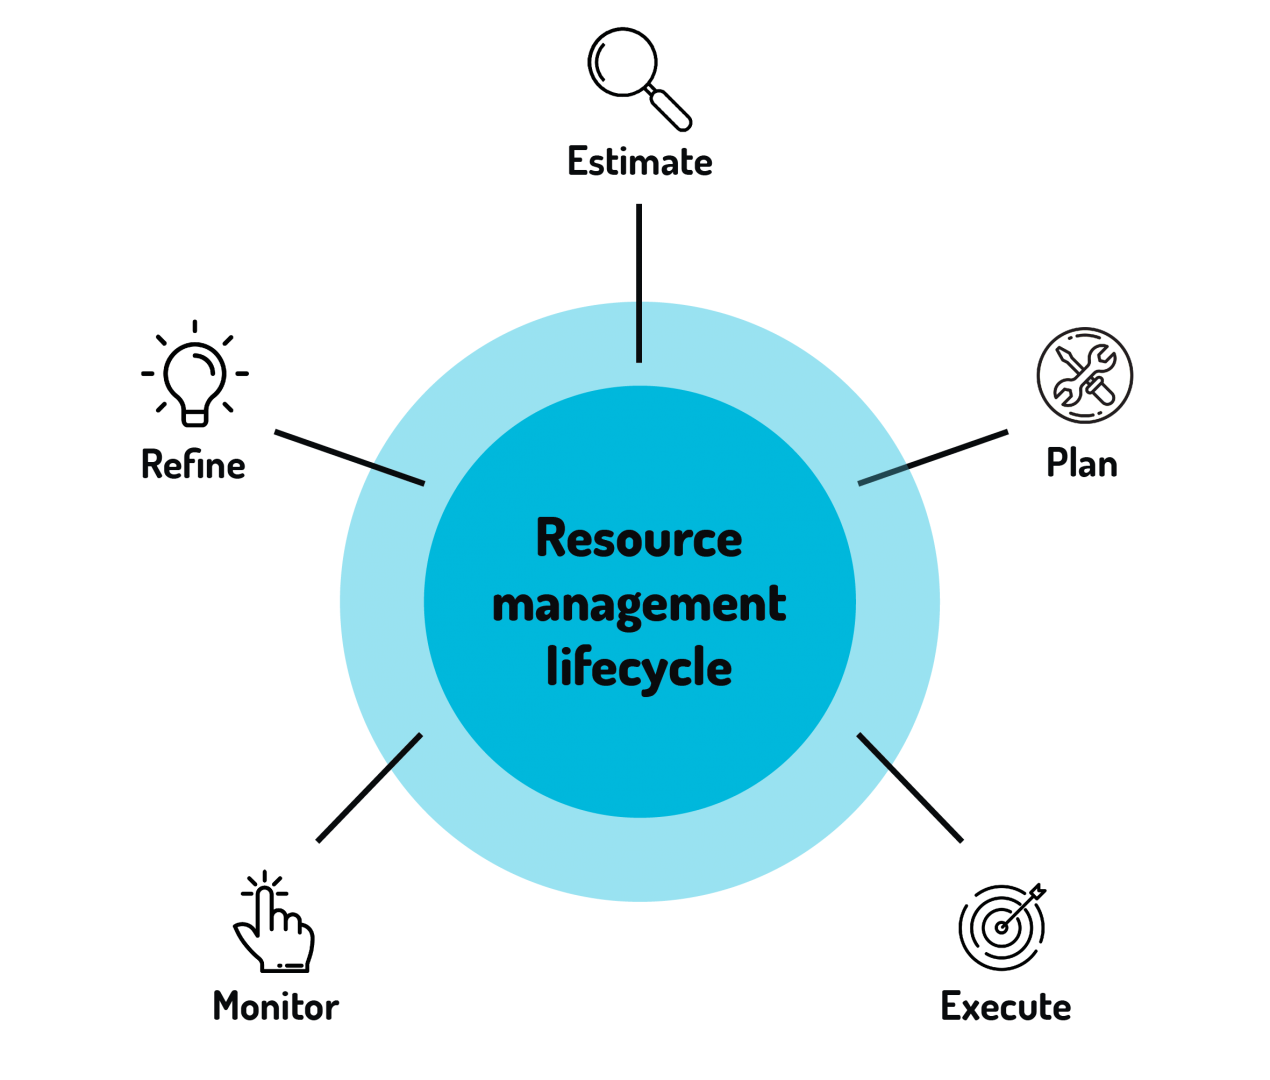 Resource management lifecycle